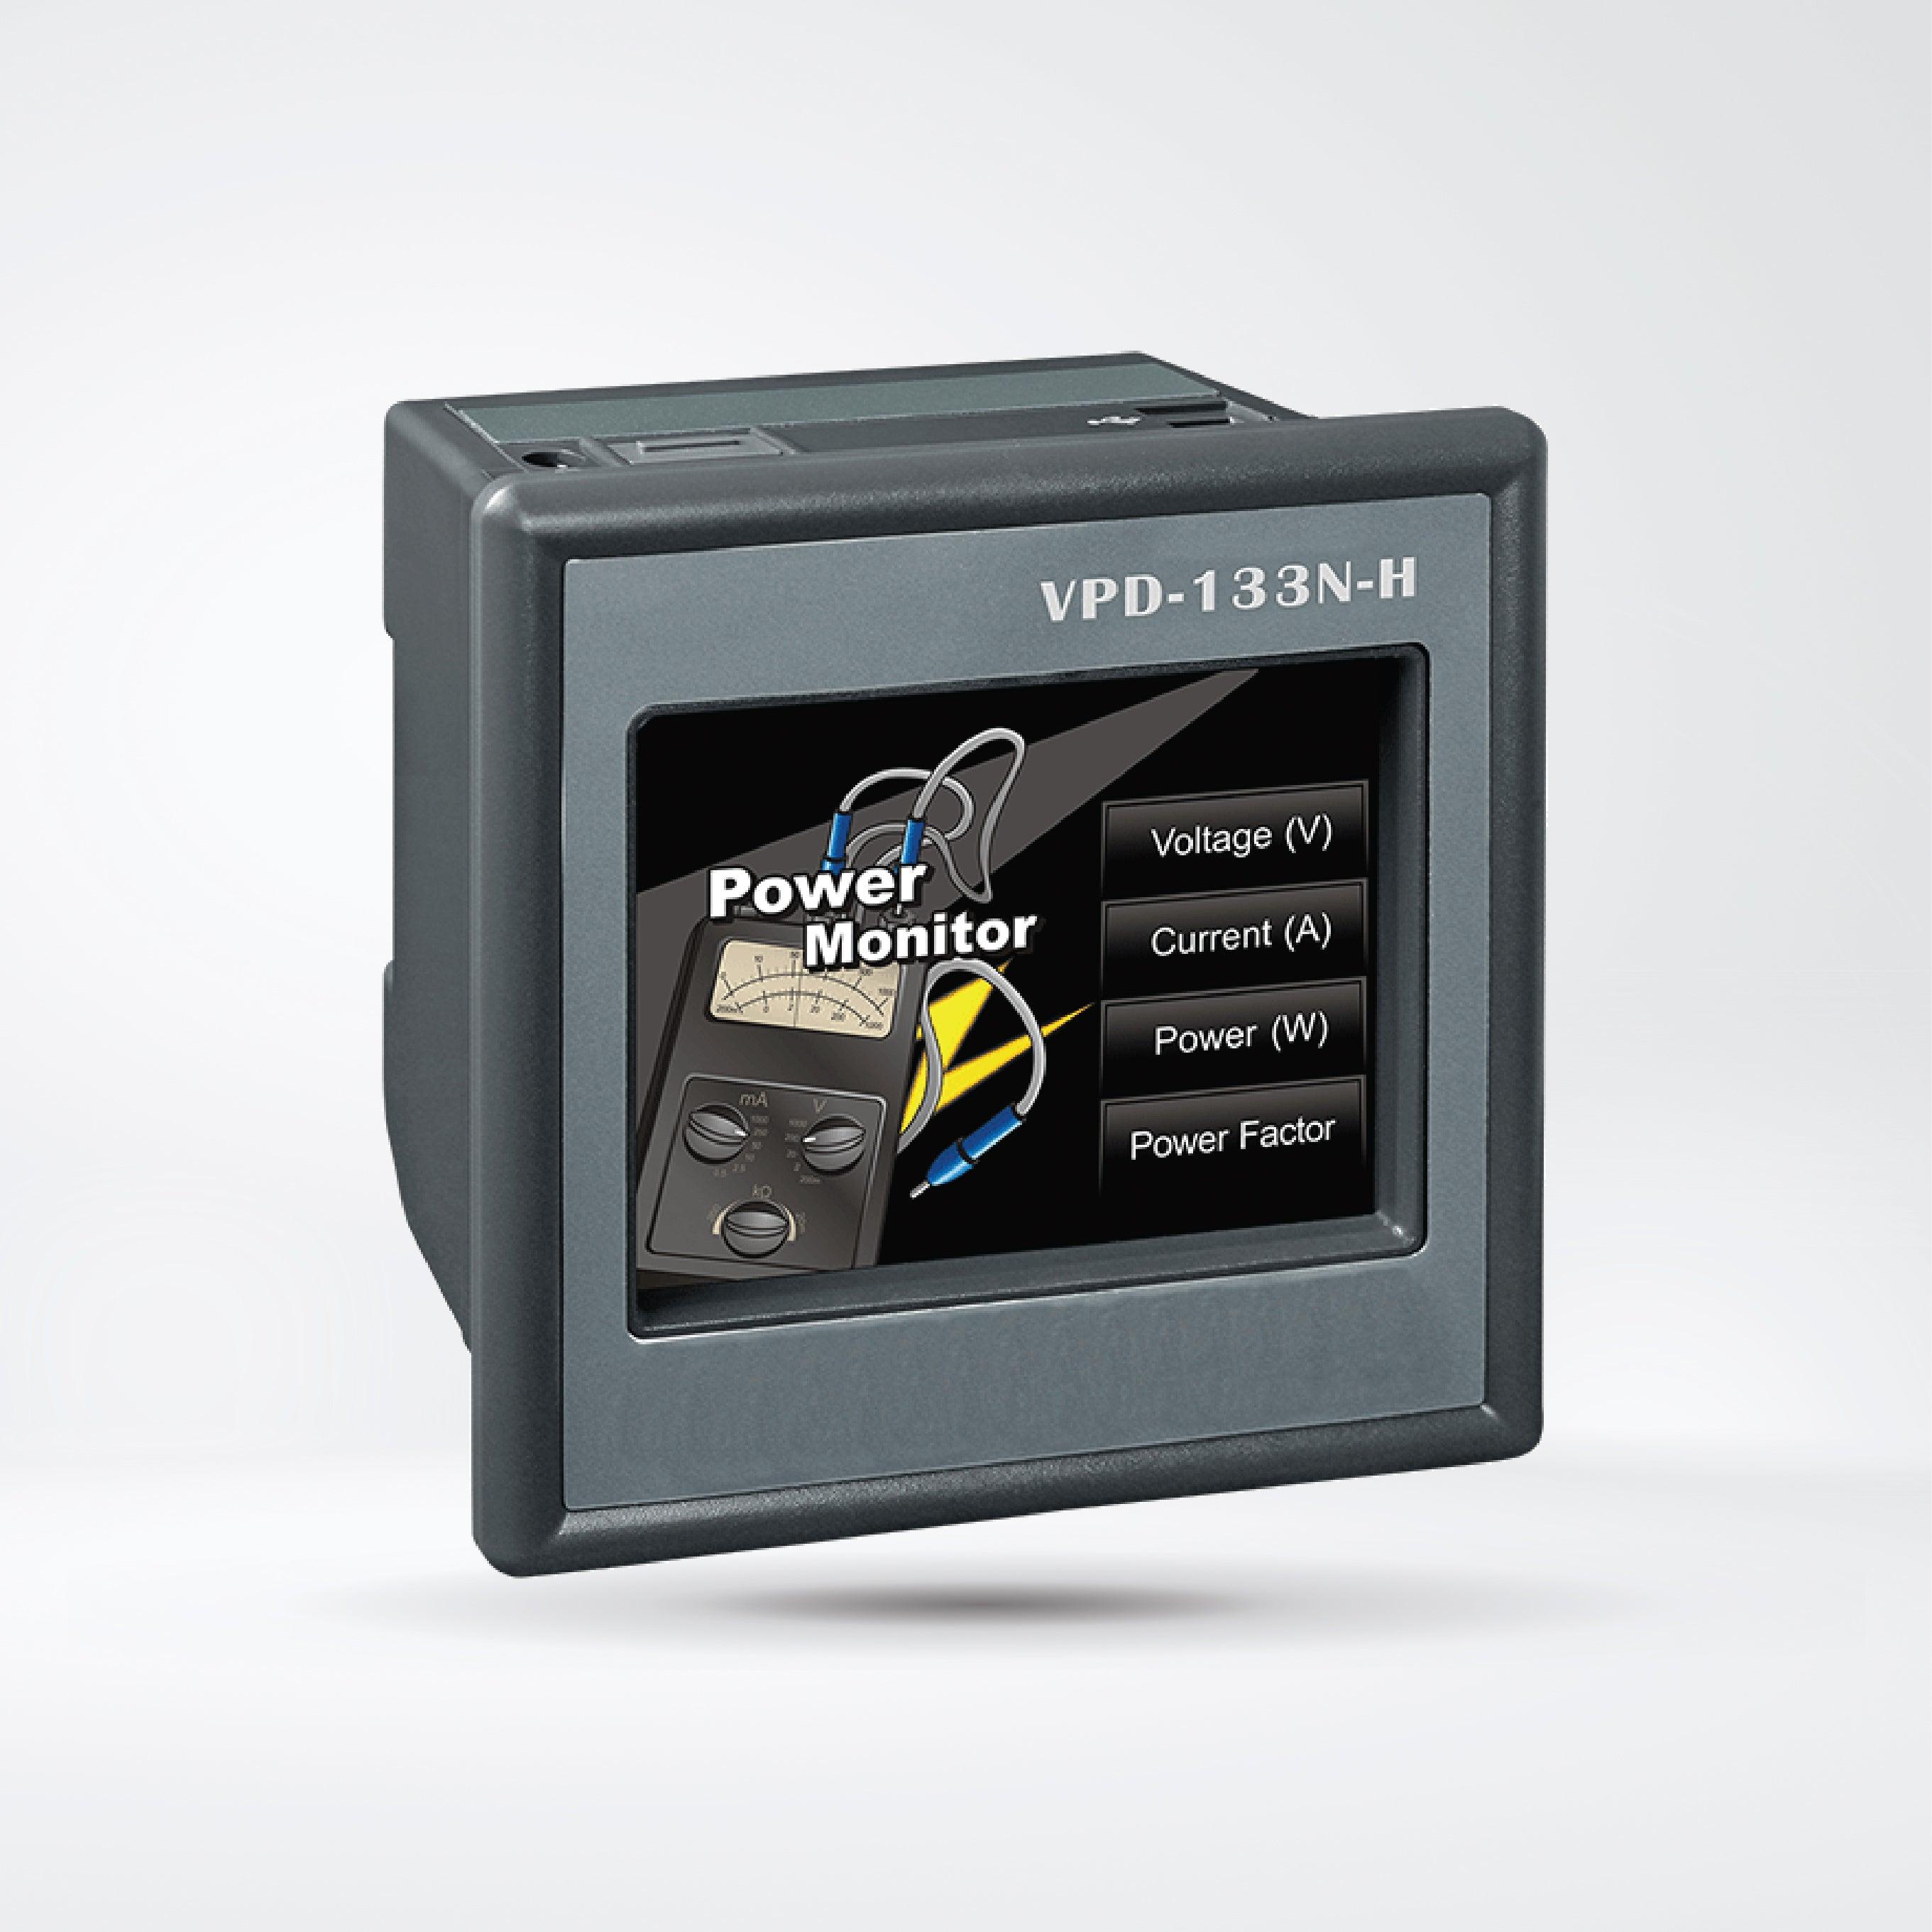 VPD-133N-H 3.5" Touch HMI Device with 2 x RS-232/RS-485, Ethernet (PoE) - Riverplus